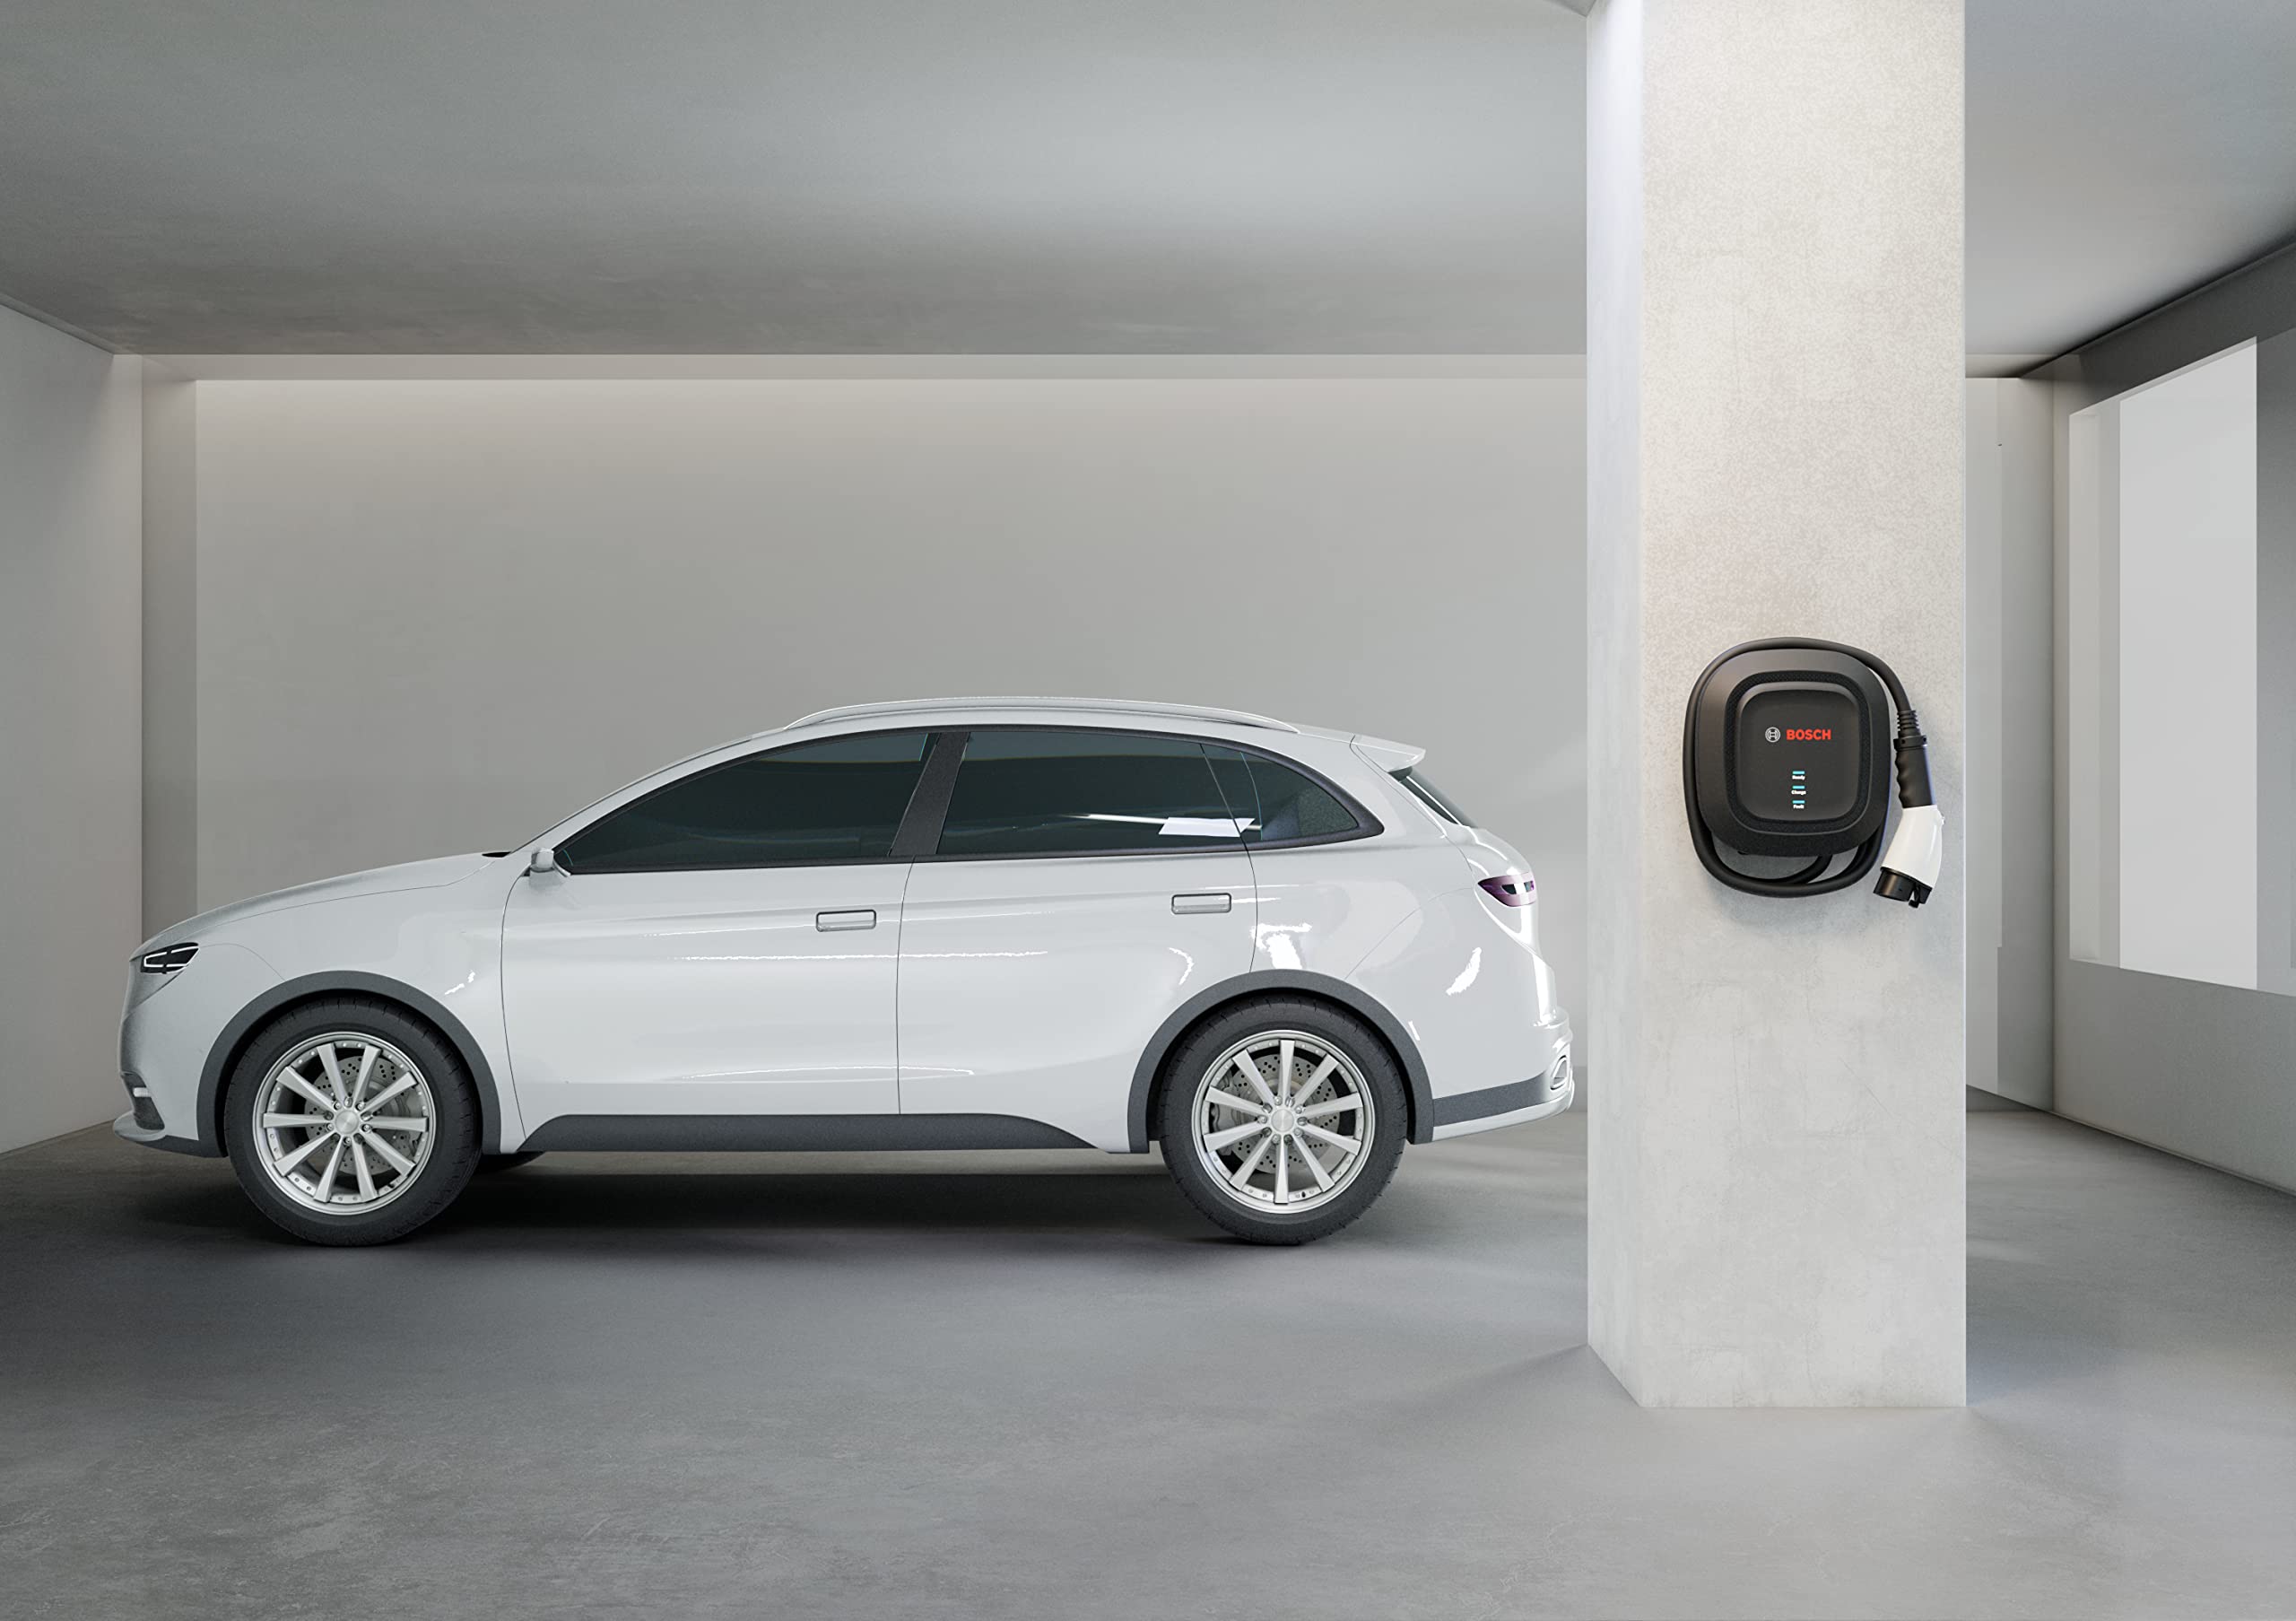 BOSCH EV300 Level 2 EV Charging Station - Convenient and Fast Home Charging for All North American EVs